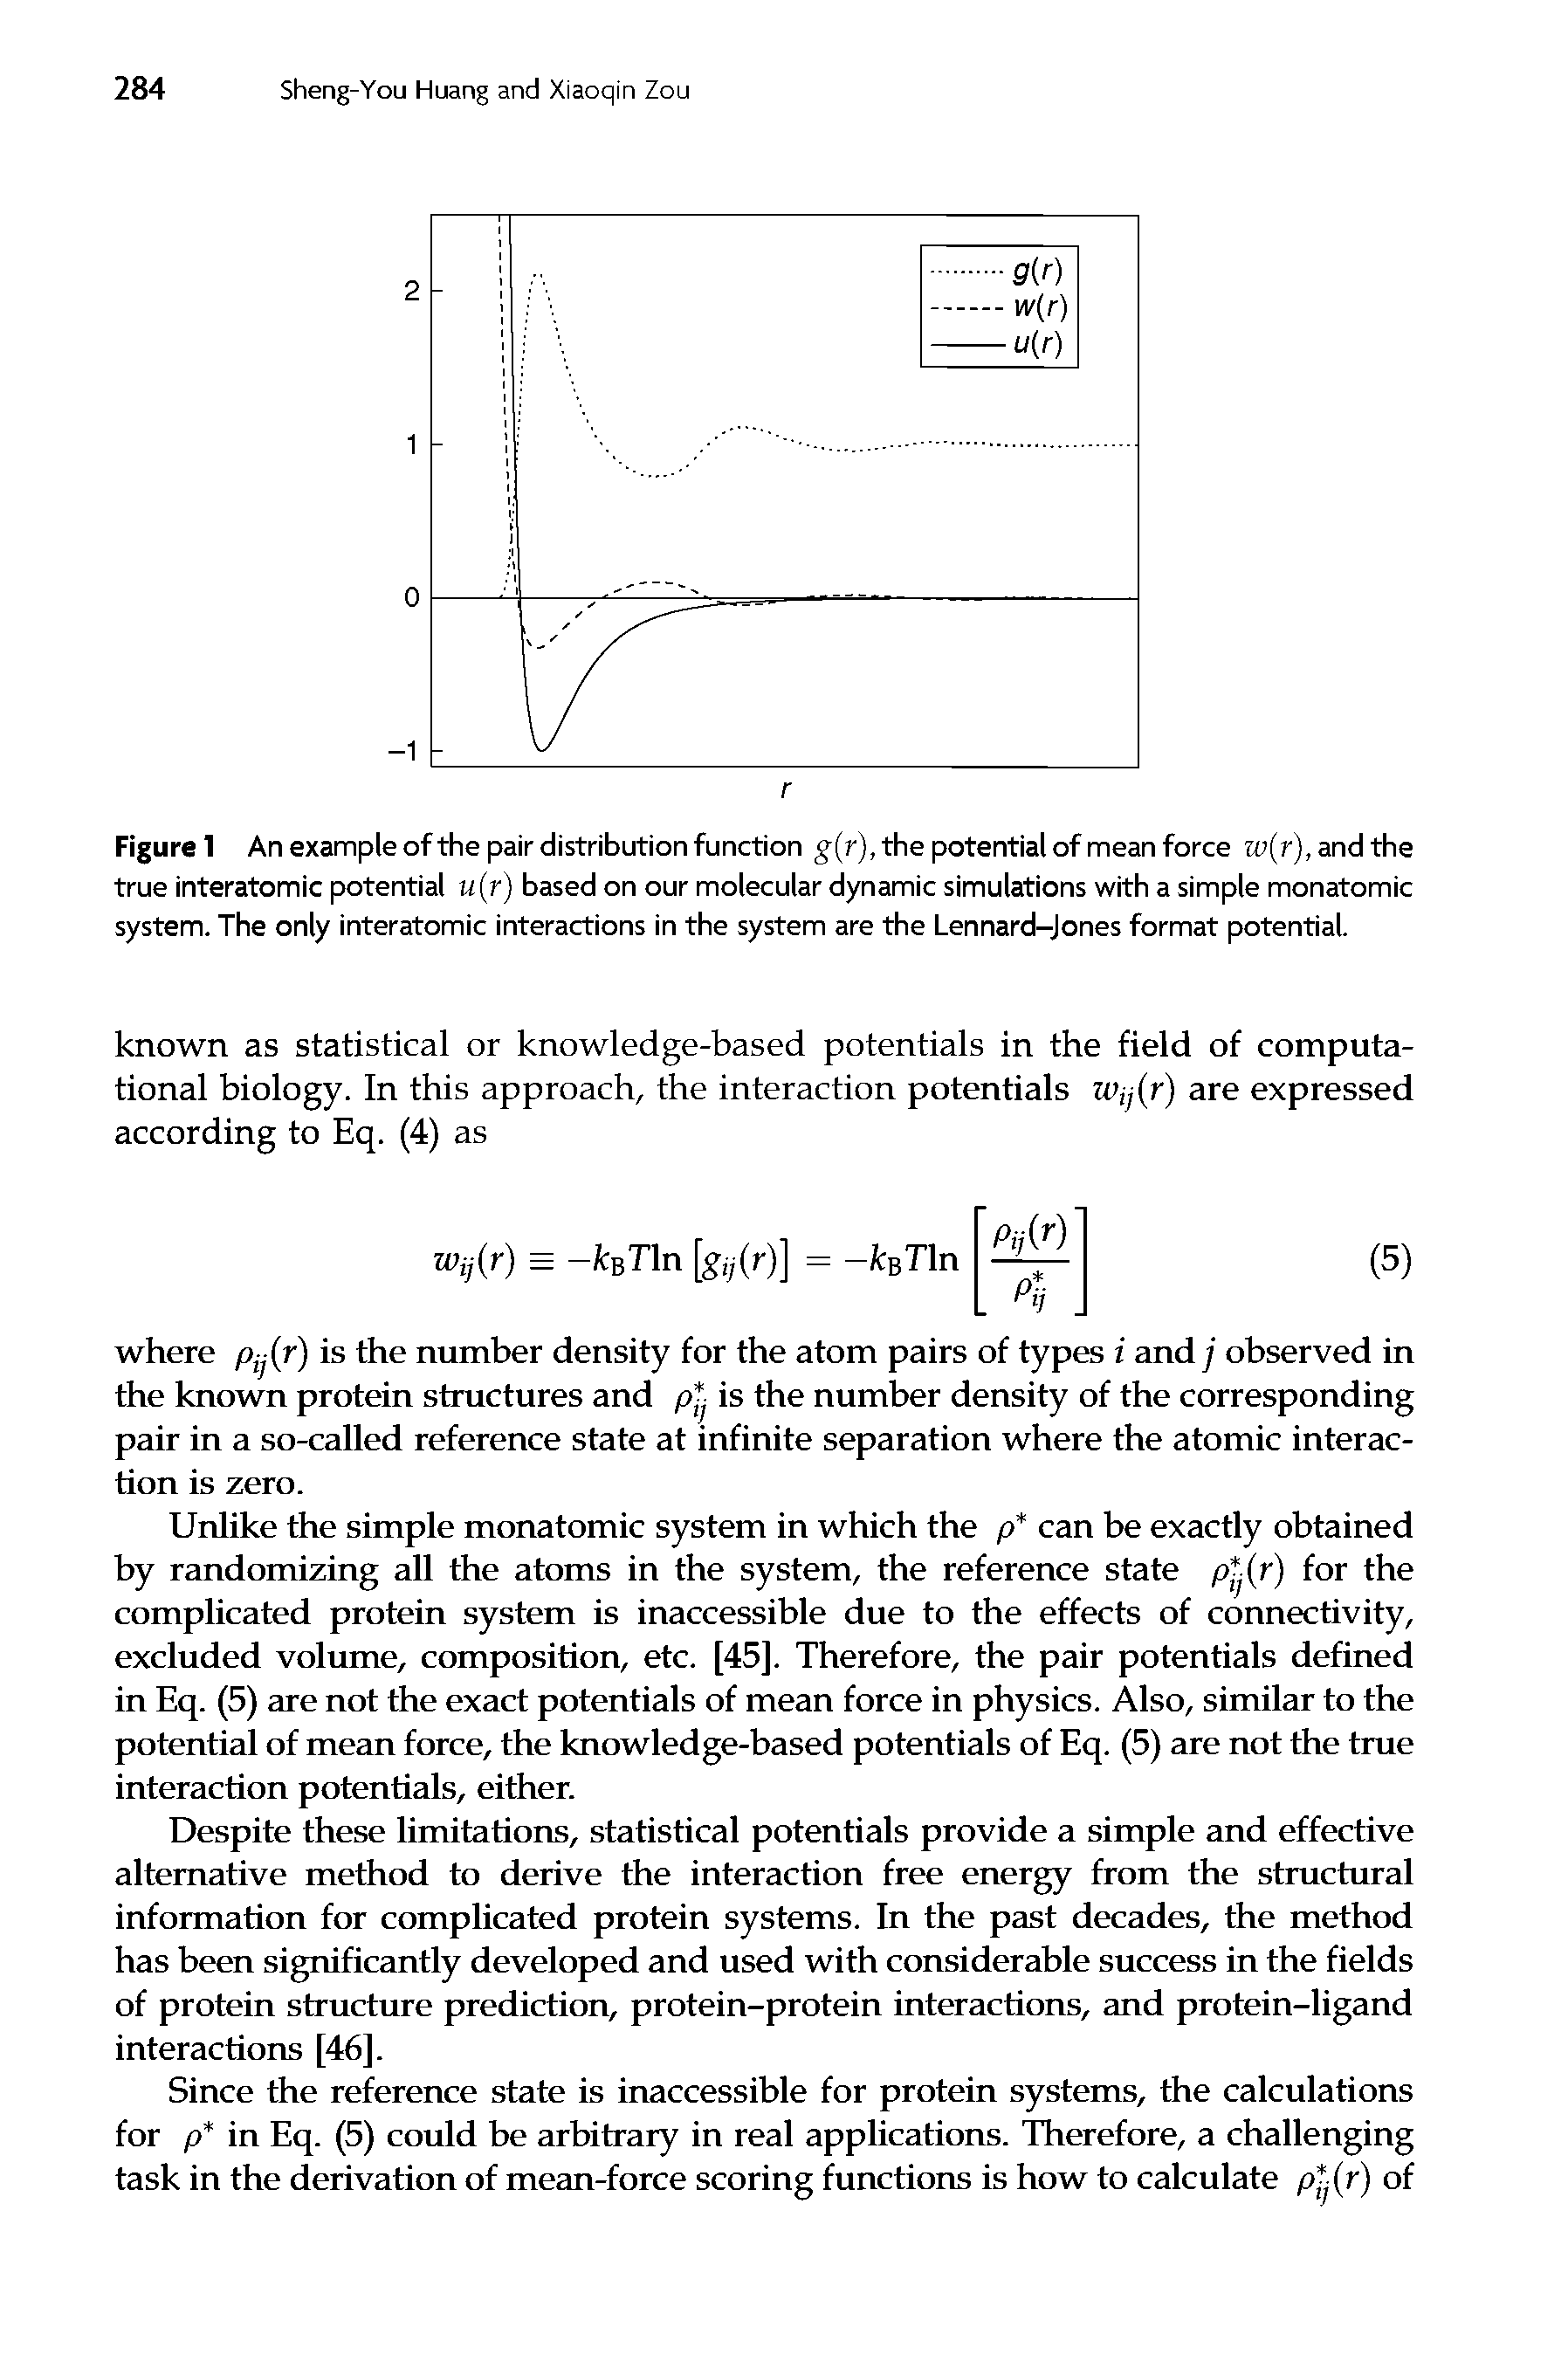 Figure 1 An example of the pair distribution function g(r), the potential of mean force w(r), and the true interatomic potential u(r) based on our molecular dynamic simulations with a simple monatomic system. The only interatomic interactions in the system are the Lennard-Jones format potential.